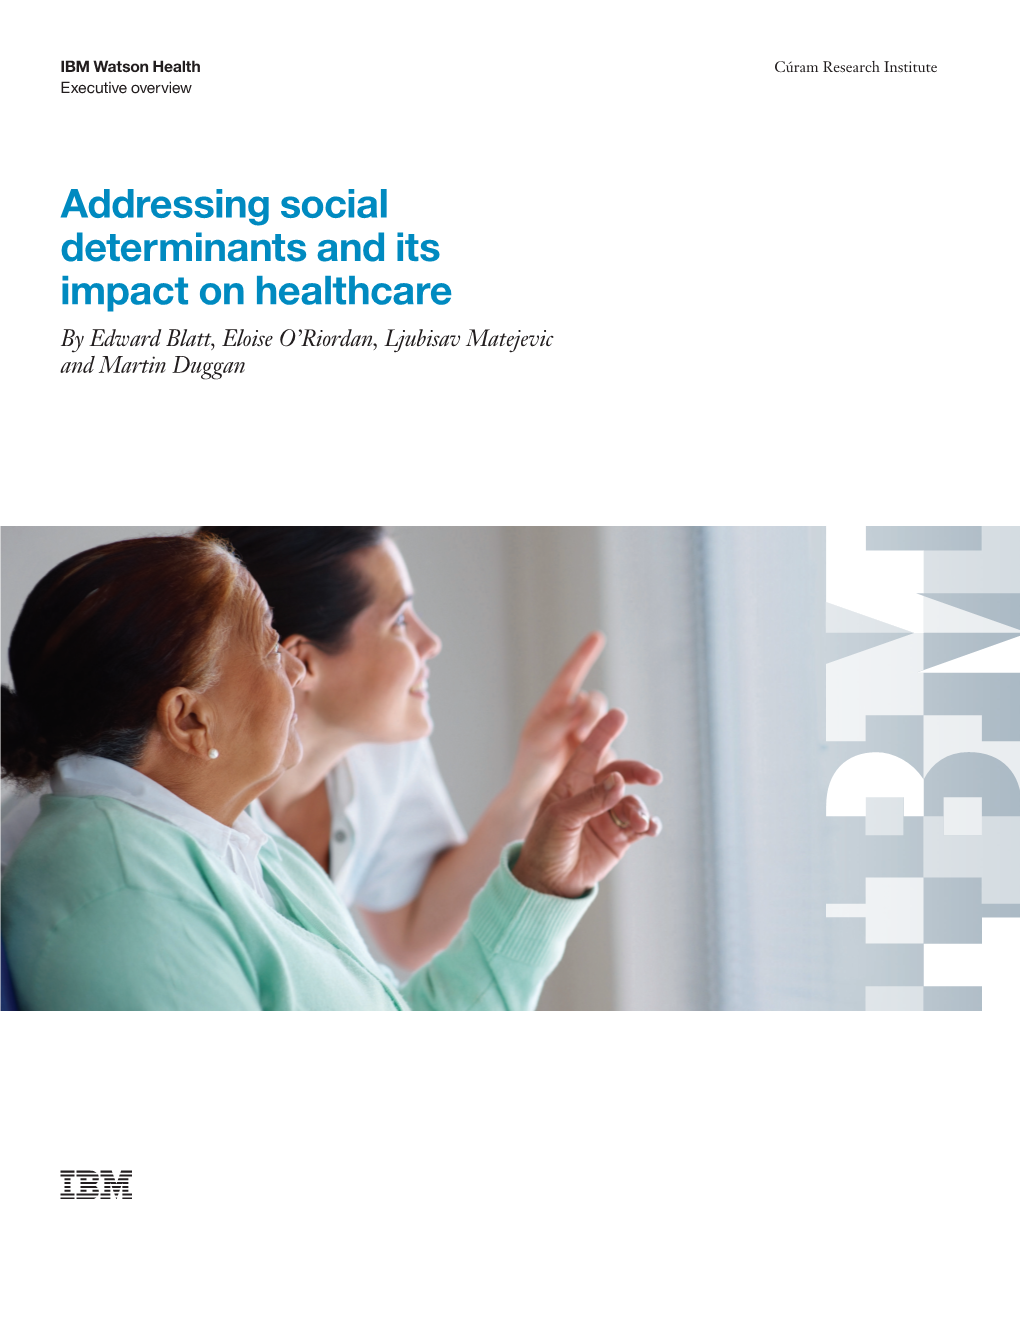 Addressing Social Determinants and Its Impact on Healthcare